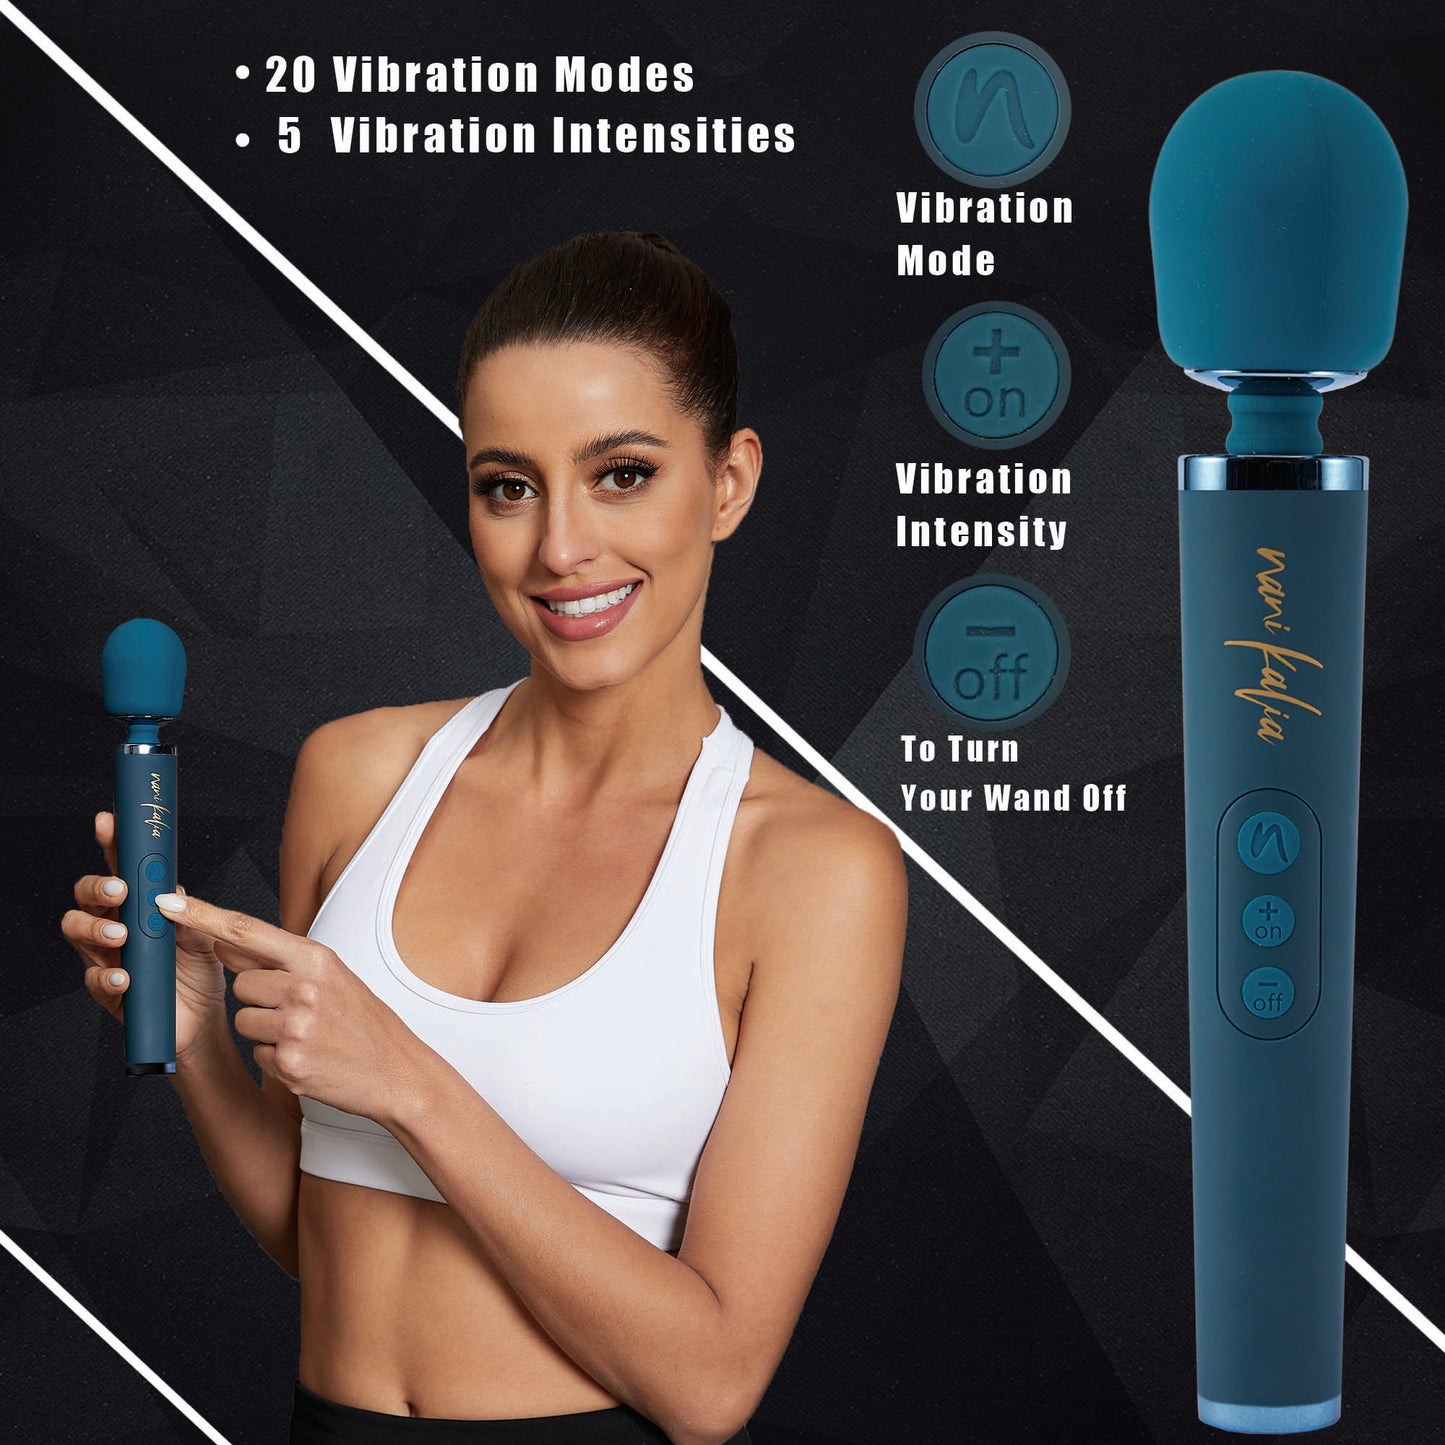 Nani Kalia Wand, Magnetic Rechargeable Waterproof Design 20 Vibration Mode Massager Fine-tuned Vibration Relaxation Function Soft High Quality Silicone (NK18 Dark Green)